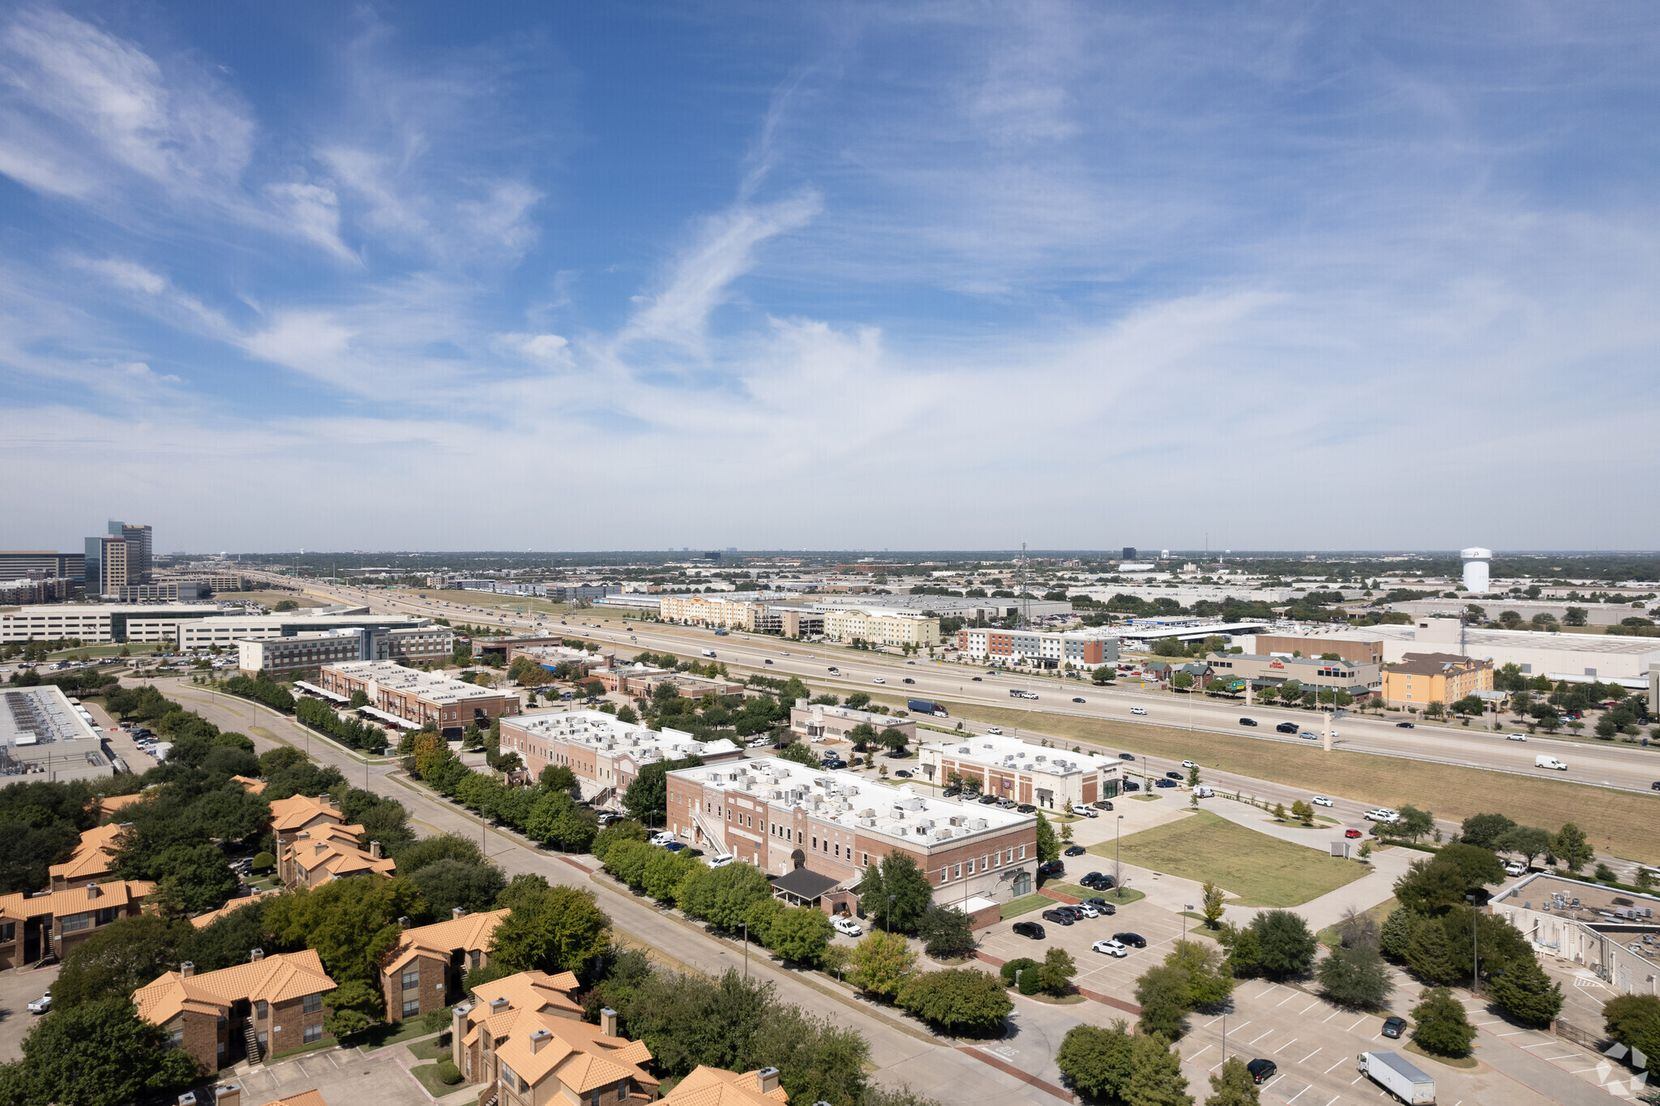 The Shire at CityLine was built starting in 2005 on Bush Turnpike in Richardson.